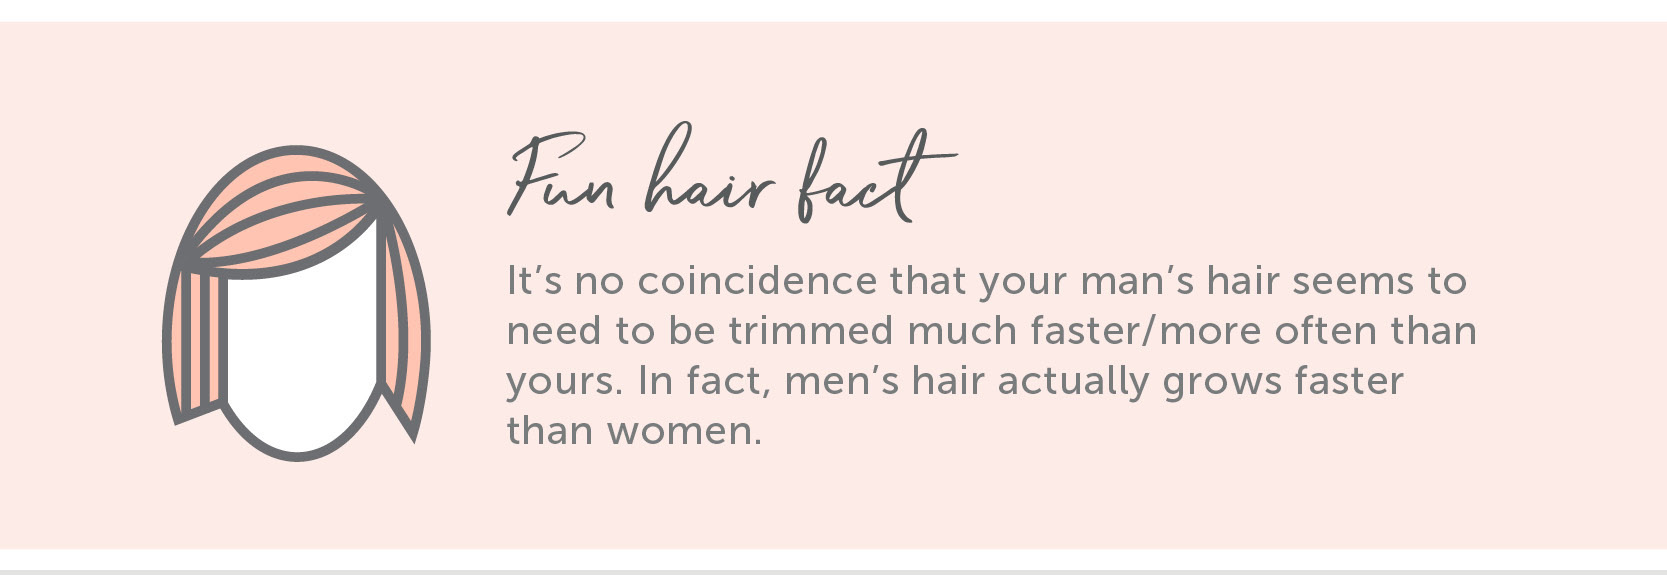 Hair Fun Fact: It’s no coincidence that your man's hair seems to need to be trimmed much faster/more often than yours. In fact, Men’s hair actually grows faster than women. 